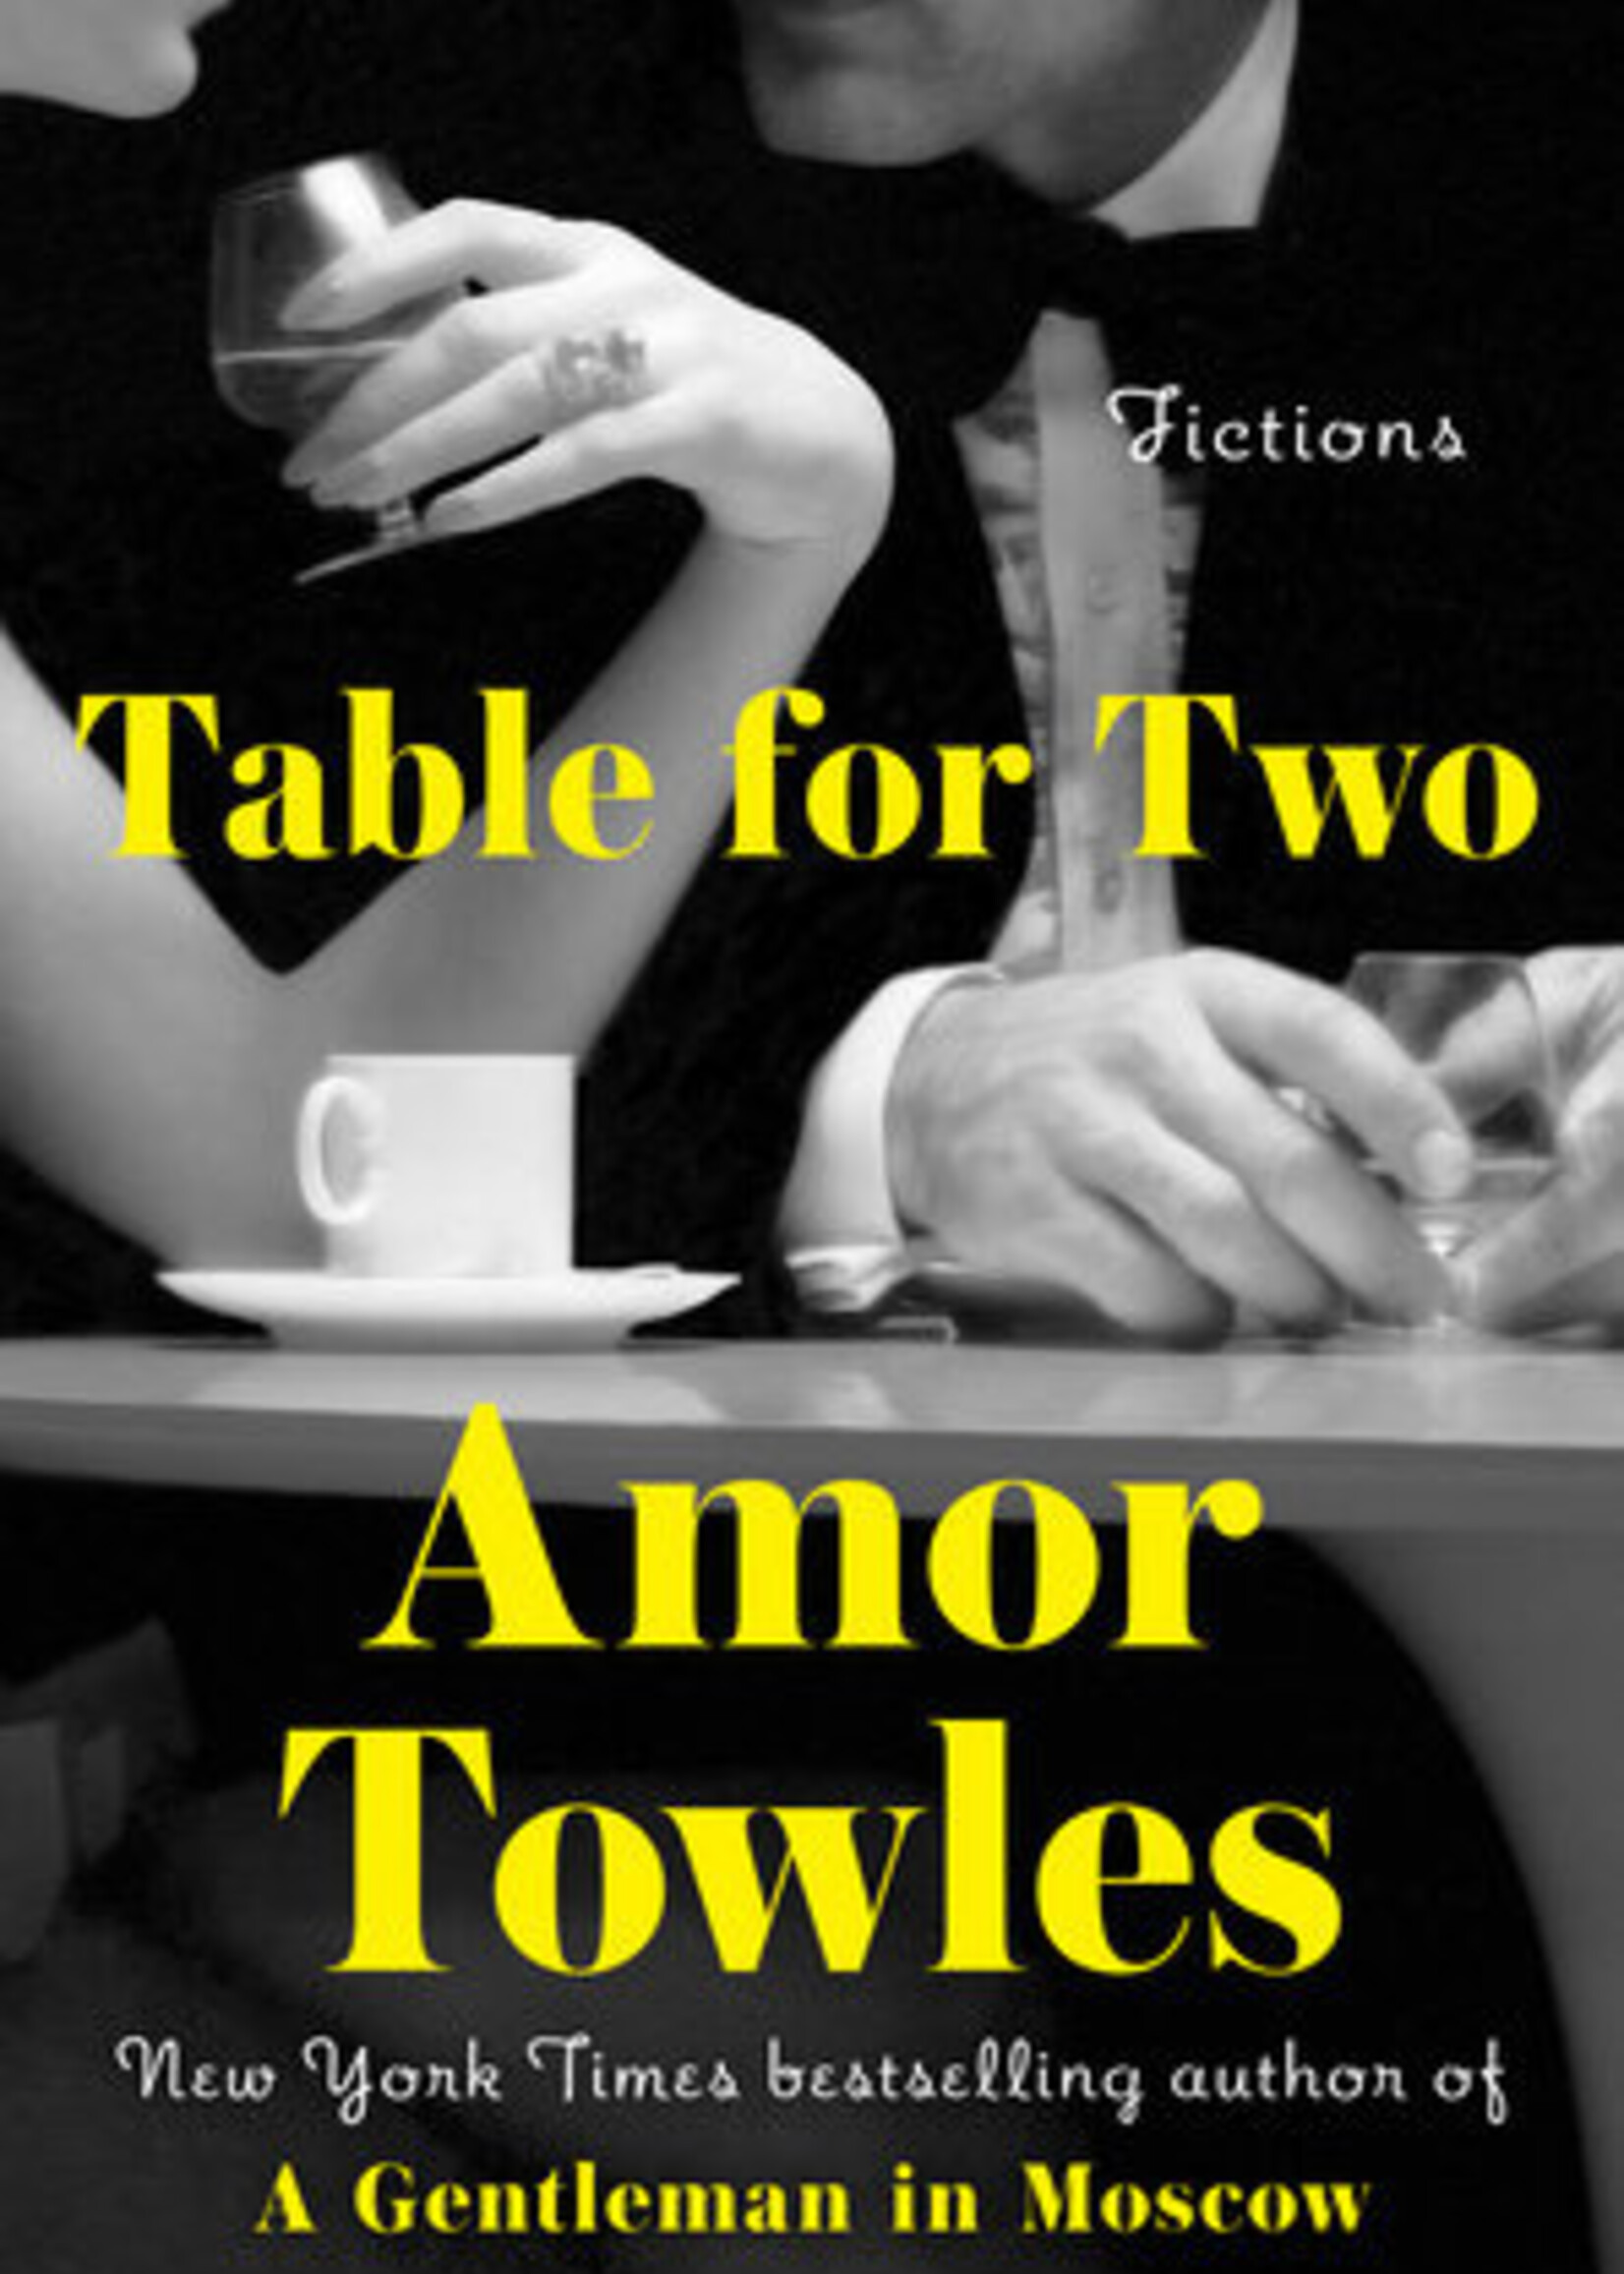 Viking Table for Two  Fictions